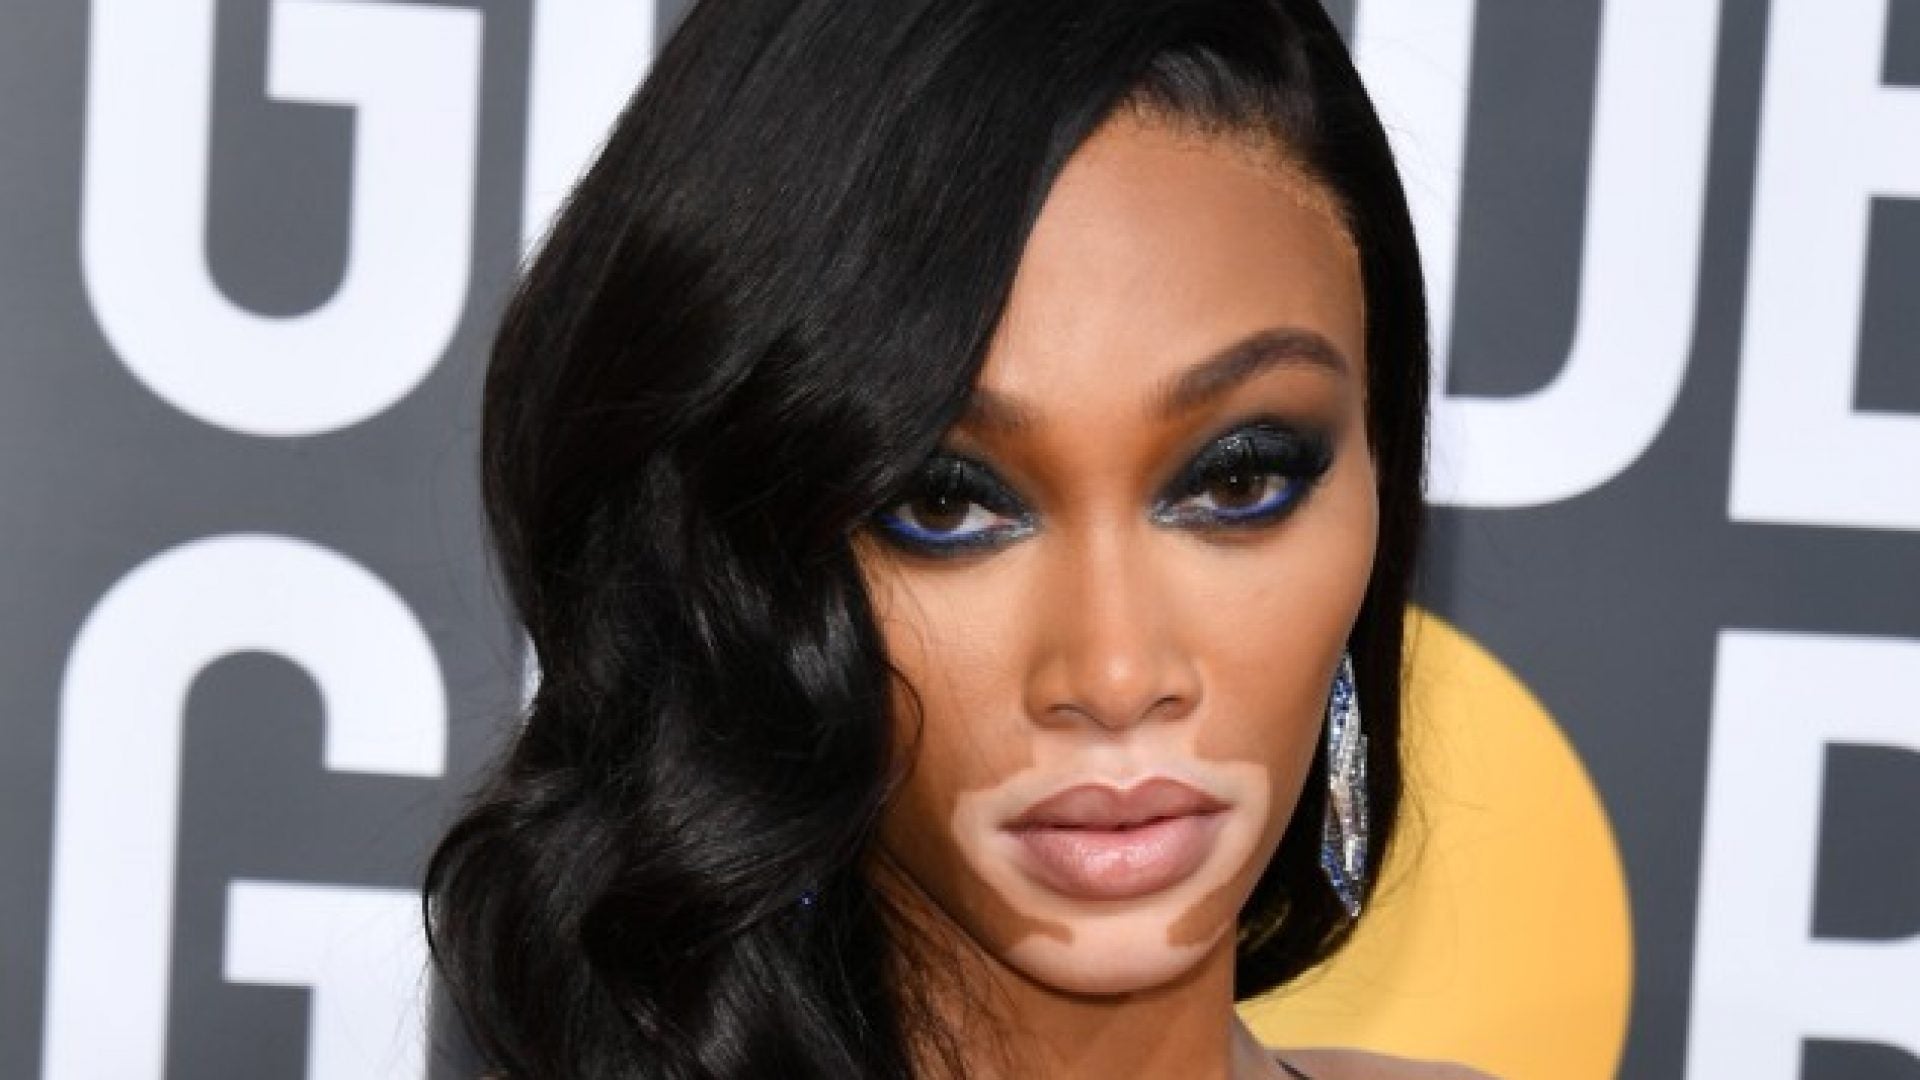 Winnie Harlow's Stunning Golden Globes Beauty Look Included This $12 Product